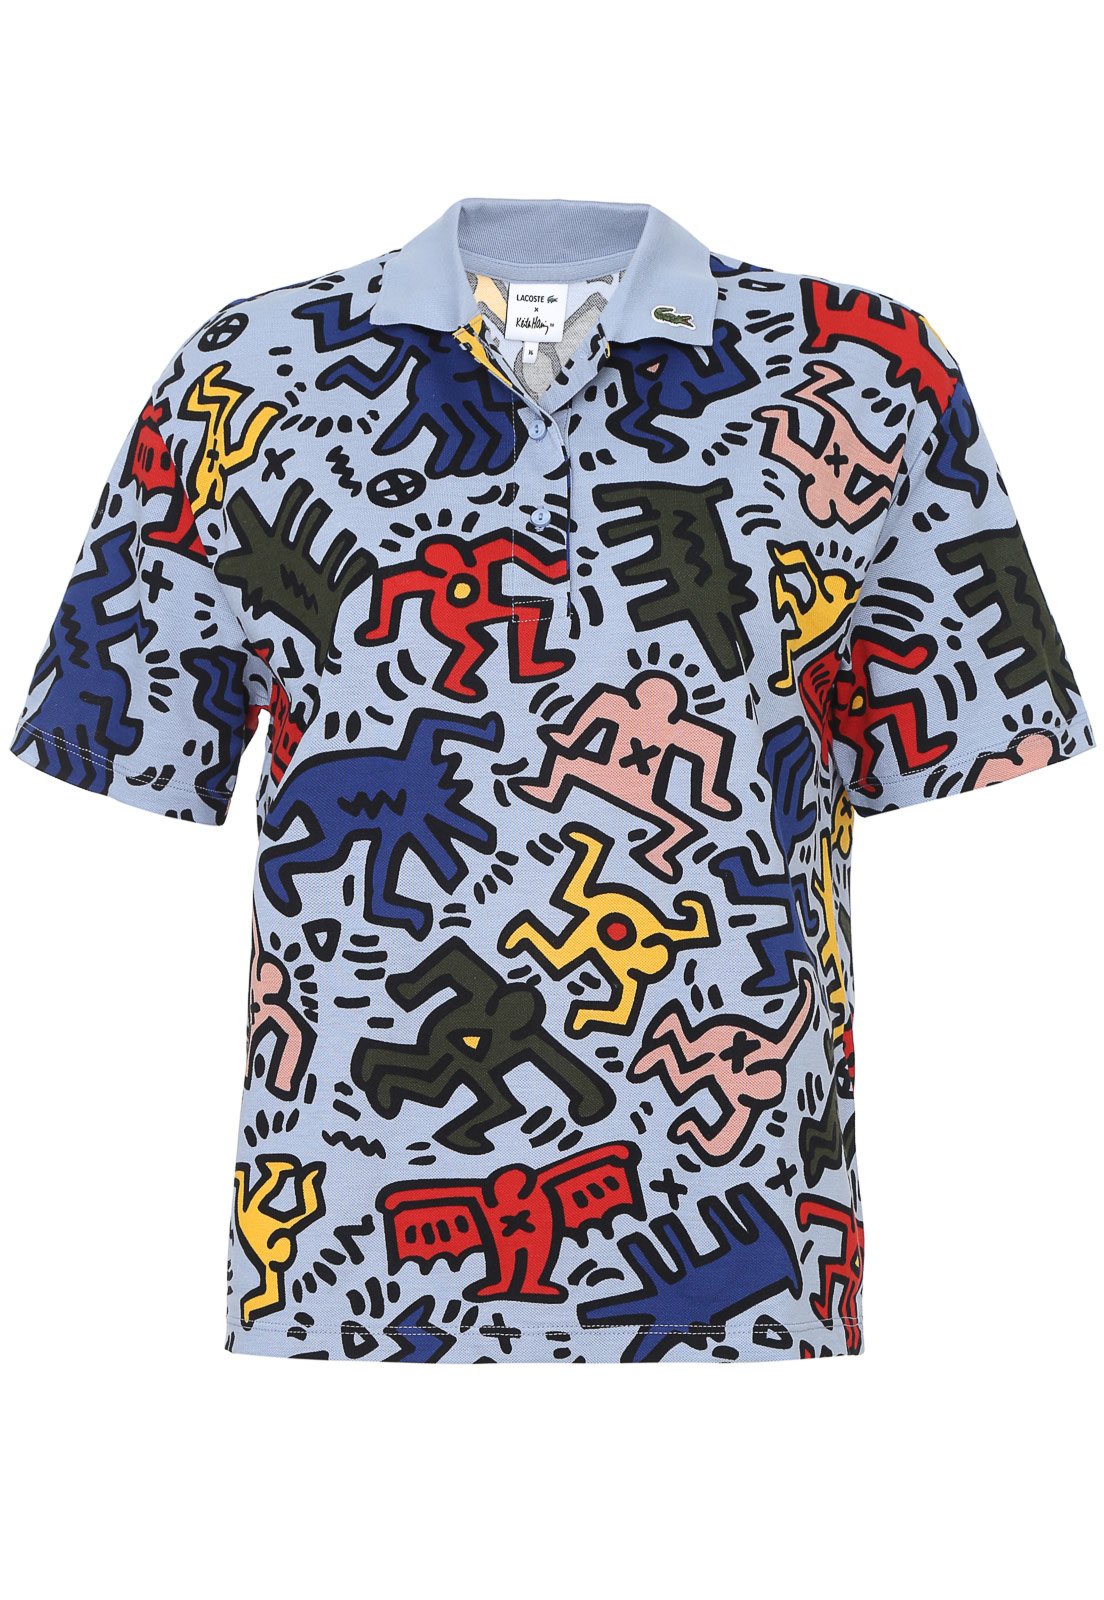 lacoste polo keith haring